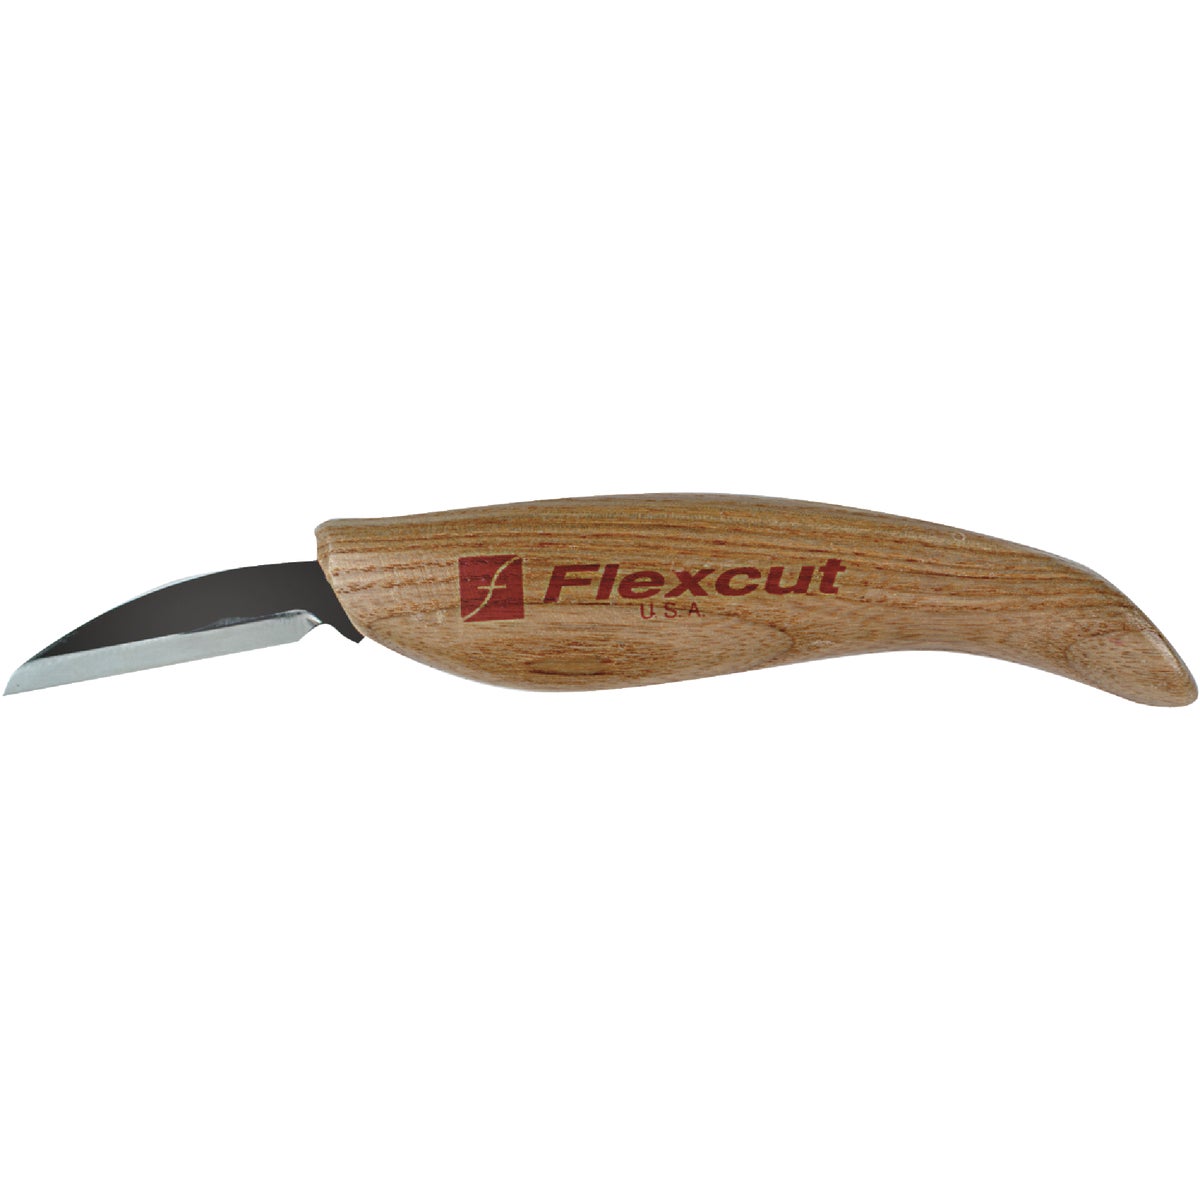 Flex Cut Rough Carving Knife with 1-3/4 In. Blade